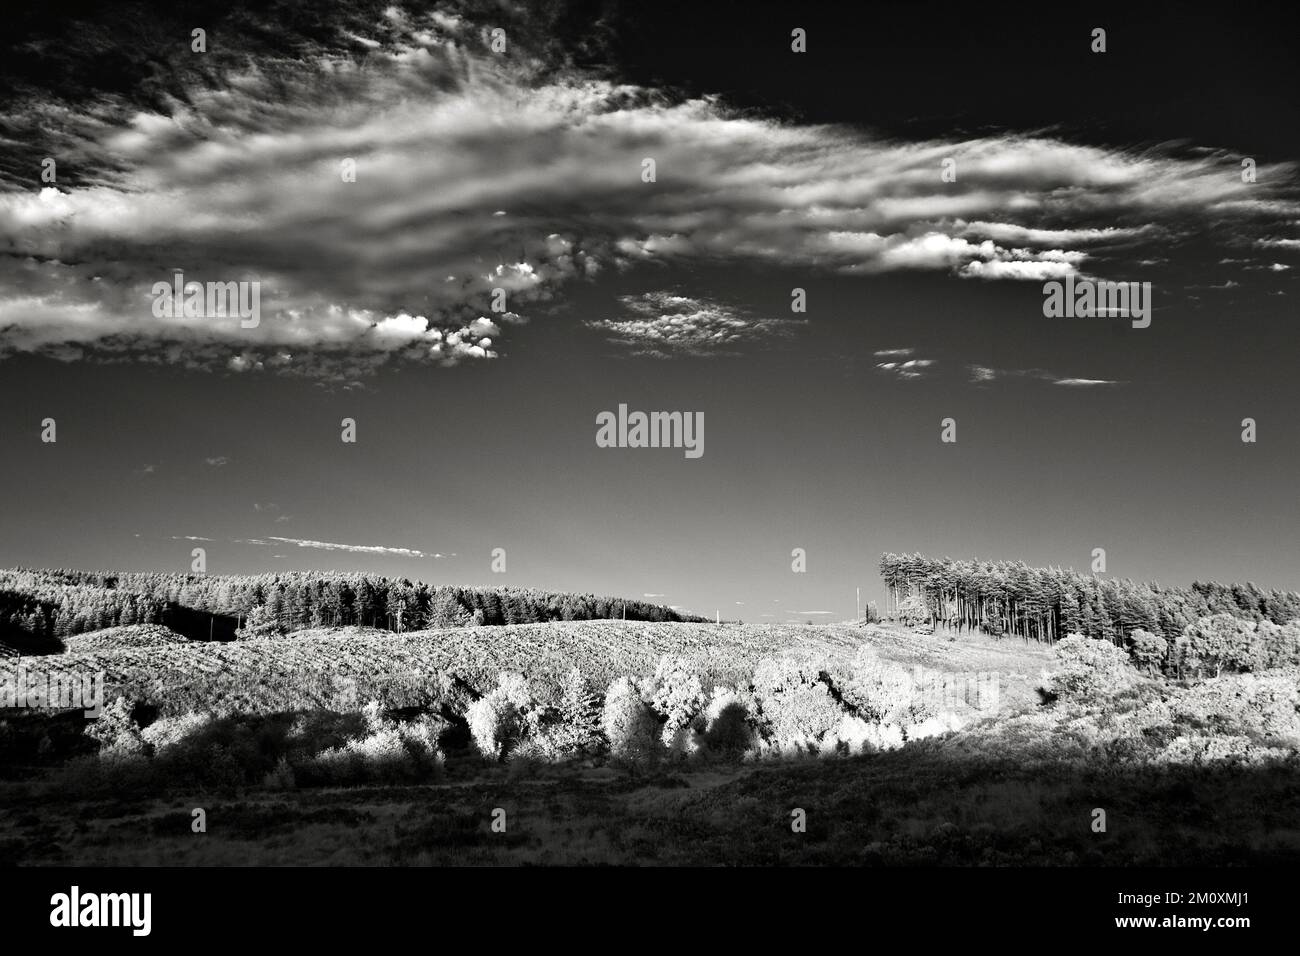 Black and white photograph of heathland on Cannock Chase AONB Area of Outstanding Natural Beauty in Staffordshire England United Kingdom Stock Photo